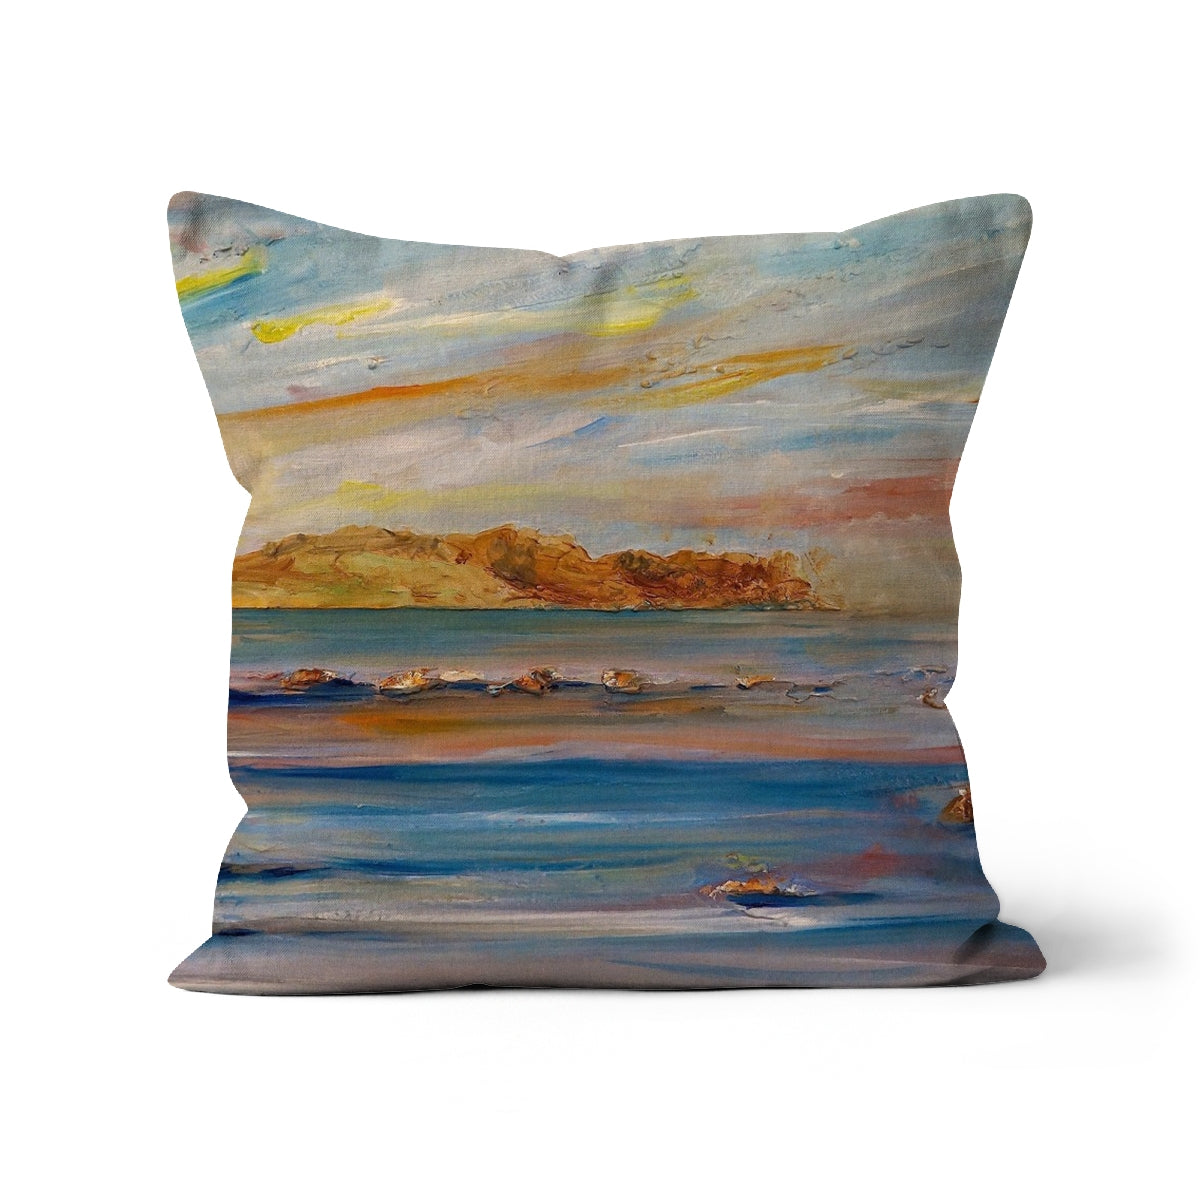 Tiree Dawn Art Gifts Cushion-Cushions-Hebridean Islands Art Gallery-Faux Suede-16"x16"-Paintings, Prints, Homeware, Art Gifts From Scotland By Scottish Artist Kevin Hunter